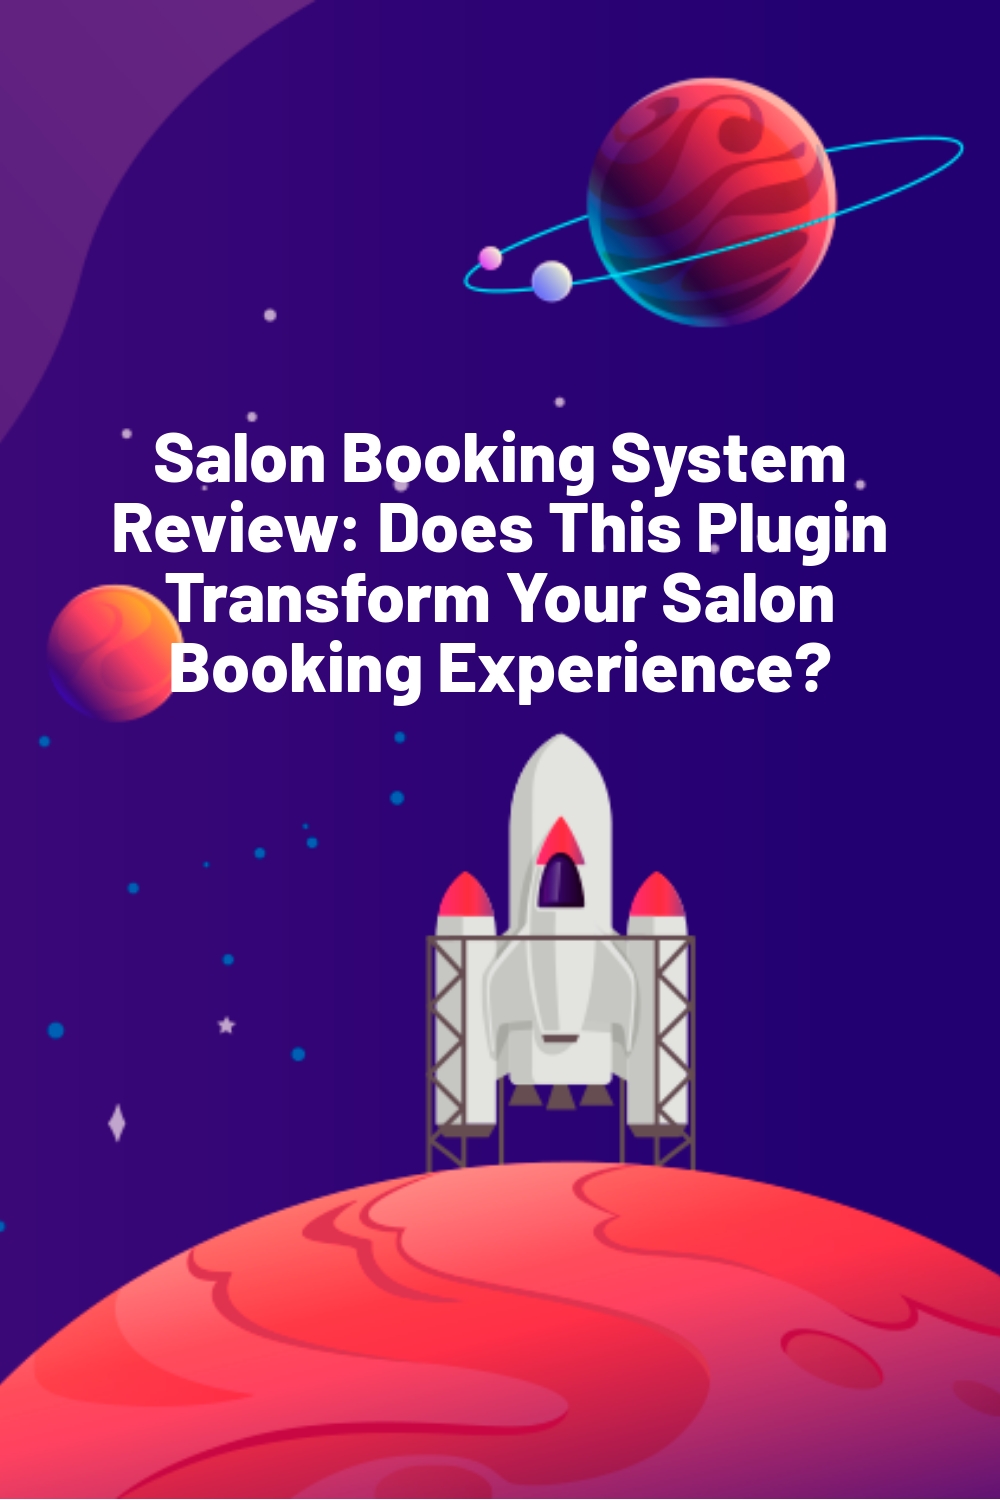 Salon Booking System Review: Does This Plugin Transform Your Salon Booking Experience?